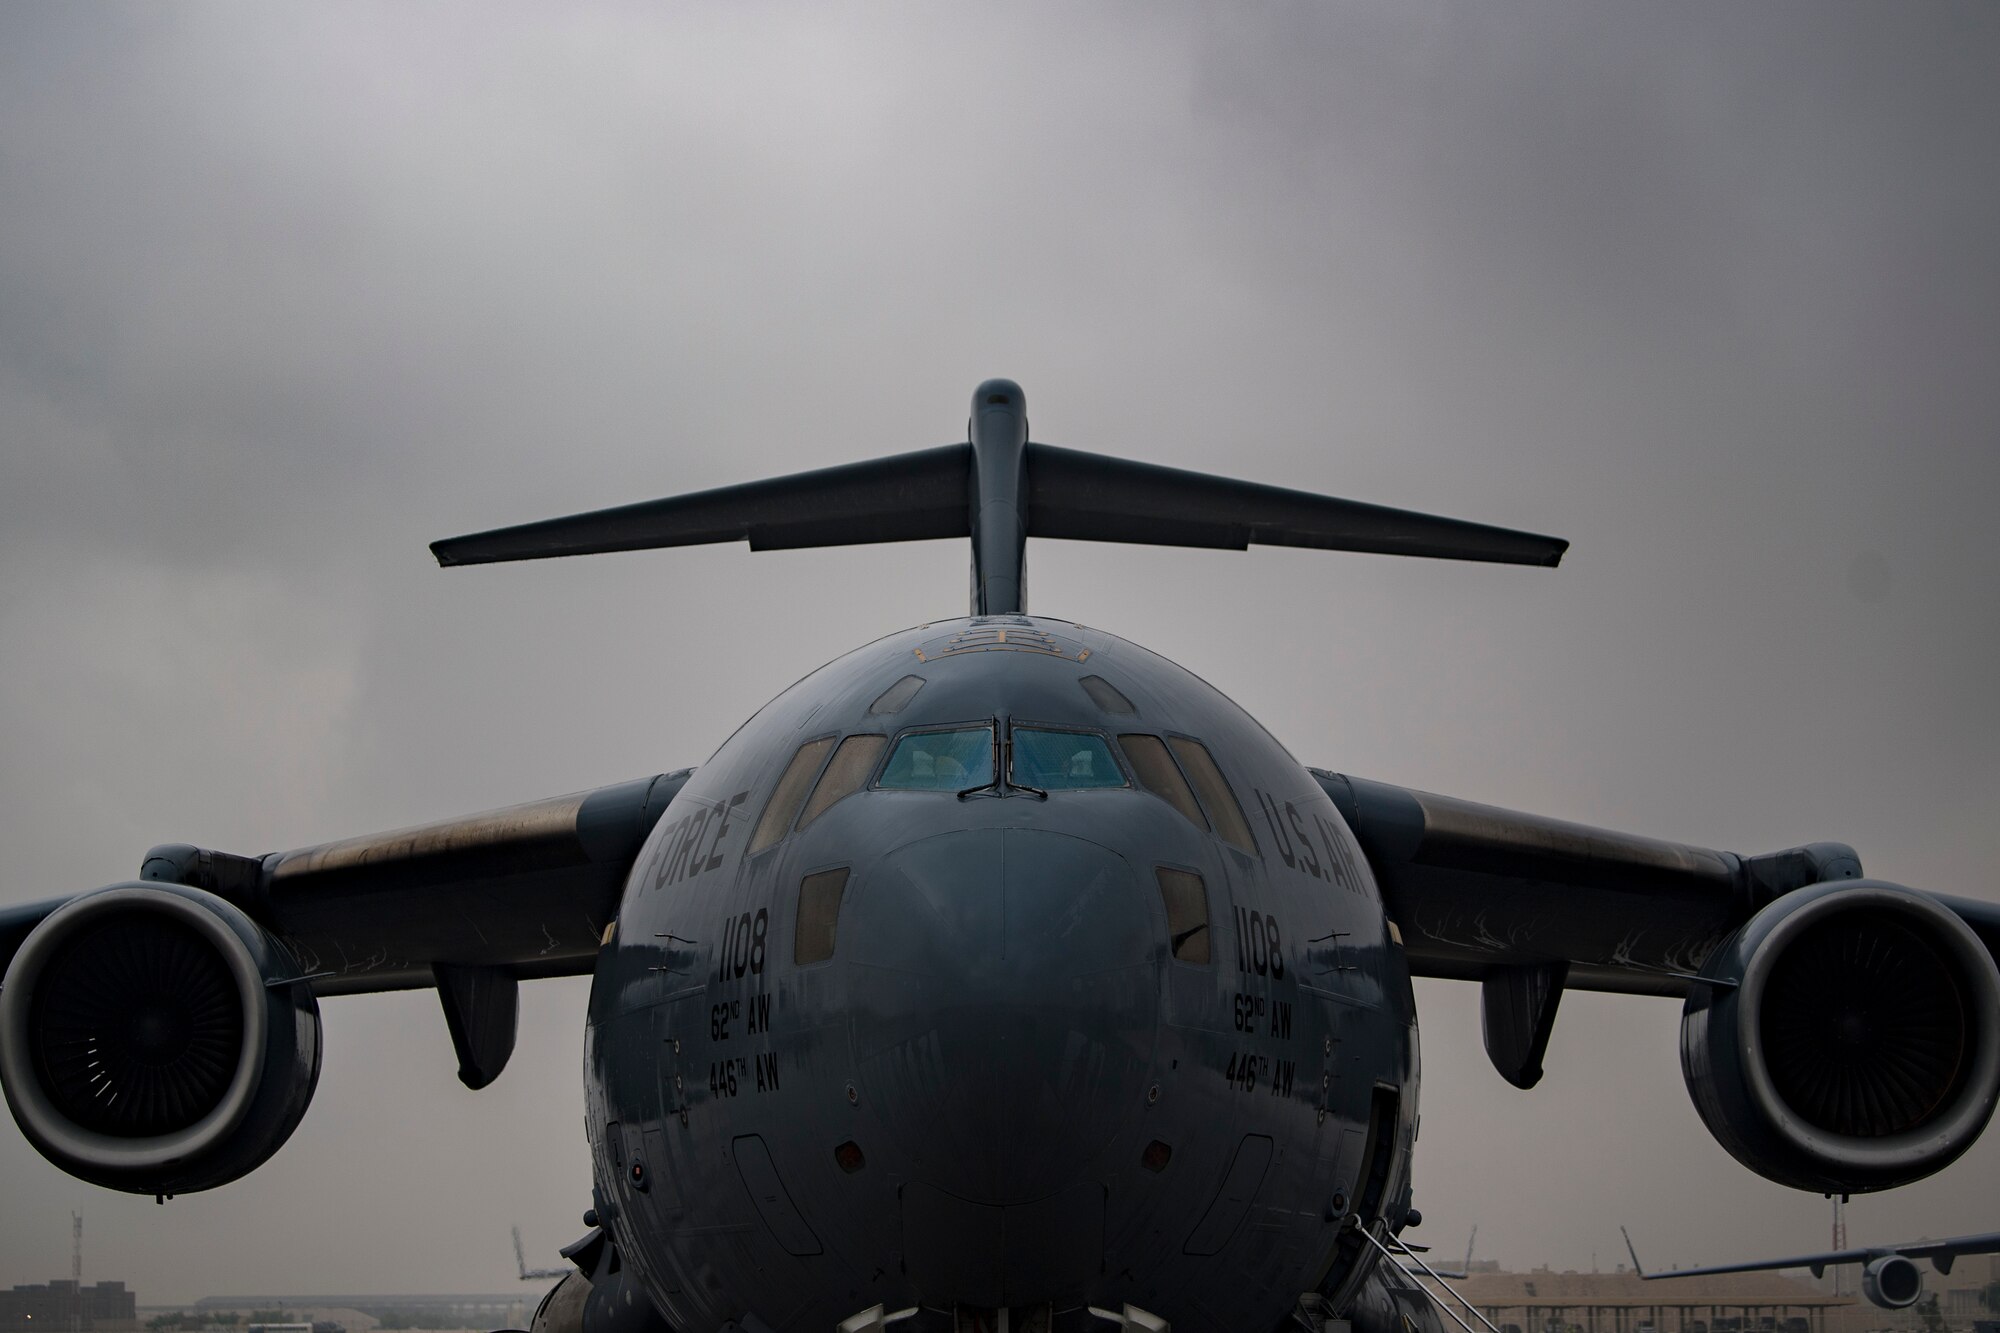 U.S. Air Force aircrew members assigned to the 816th Expeditionary Airlift Squadron conduct preflight checks of a U.S. Air Force C-17 Globemaster III at Al Udeid Air Base, Qatar, Jan. 10, 2020.